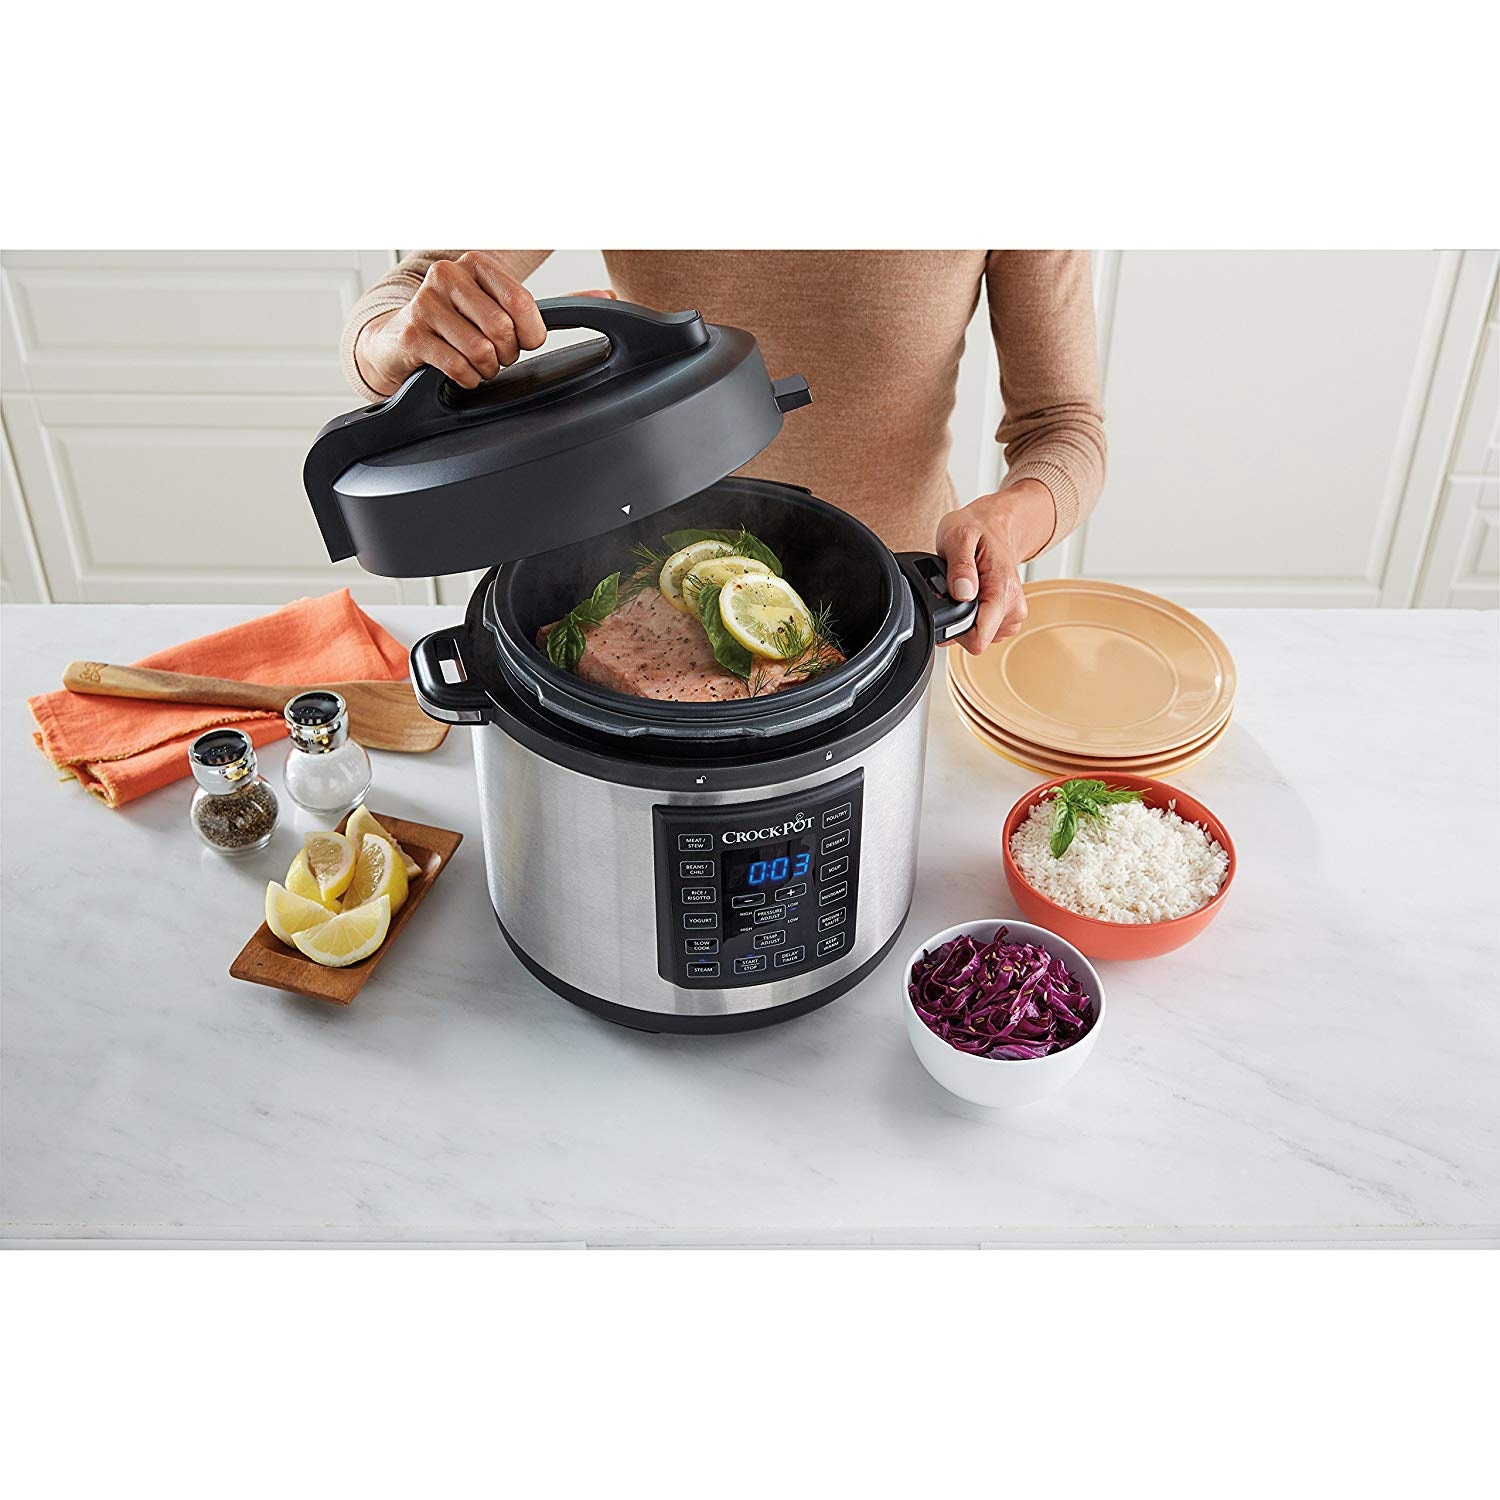 https://ak1.ostkcdn.com/images/products/is/images/direct/2a98e7dda82cc0dc0deb76b0416ecfd3e40d6c97/Crock-Pot-8-In-1-Multi-Use-Express-Cooker%2C-Silver-Black%2C-6-Quarts.jpg